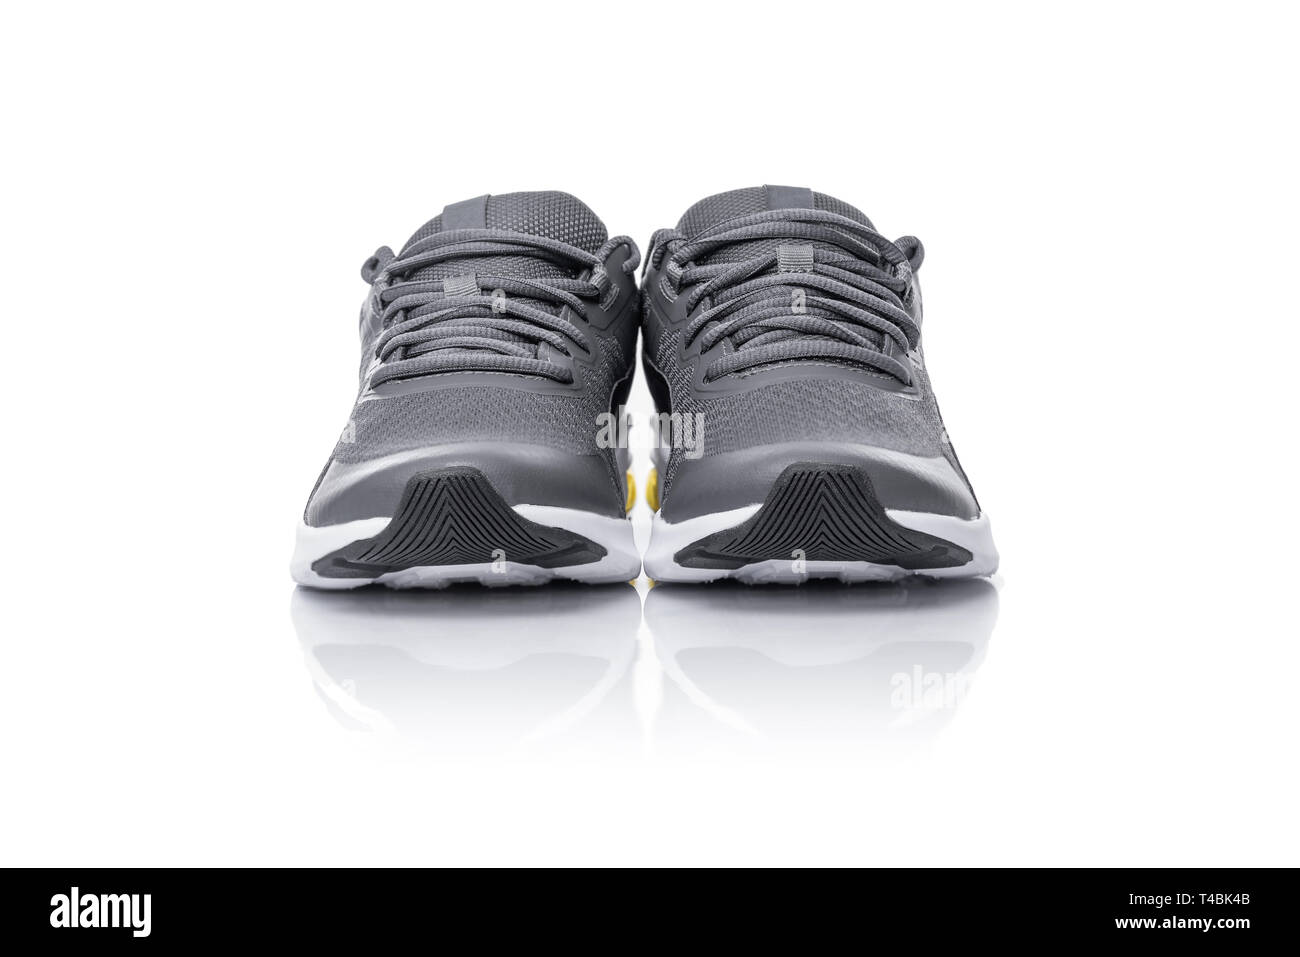 Unbranded black sport running shoes or sneakers isolated on white background. Stock Photo